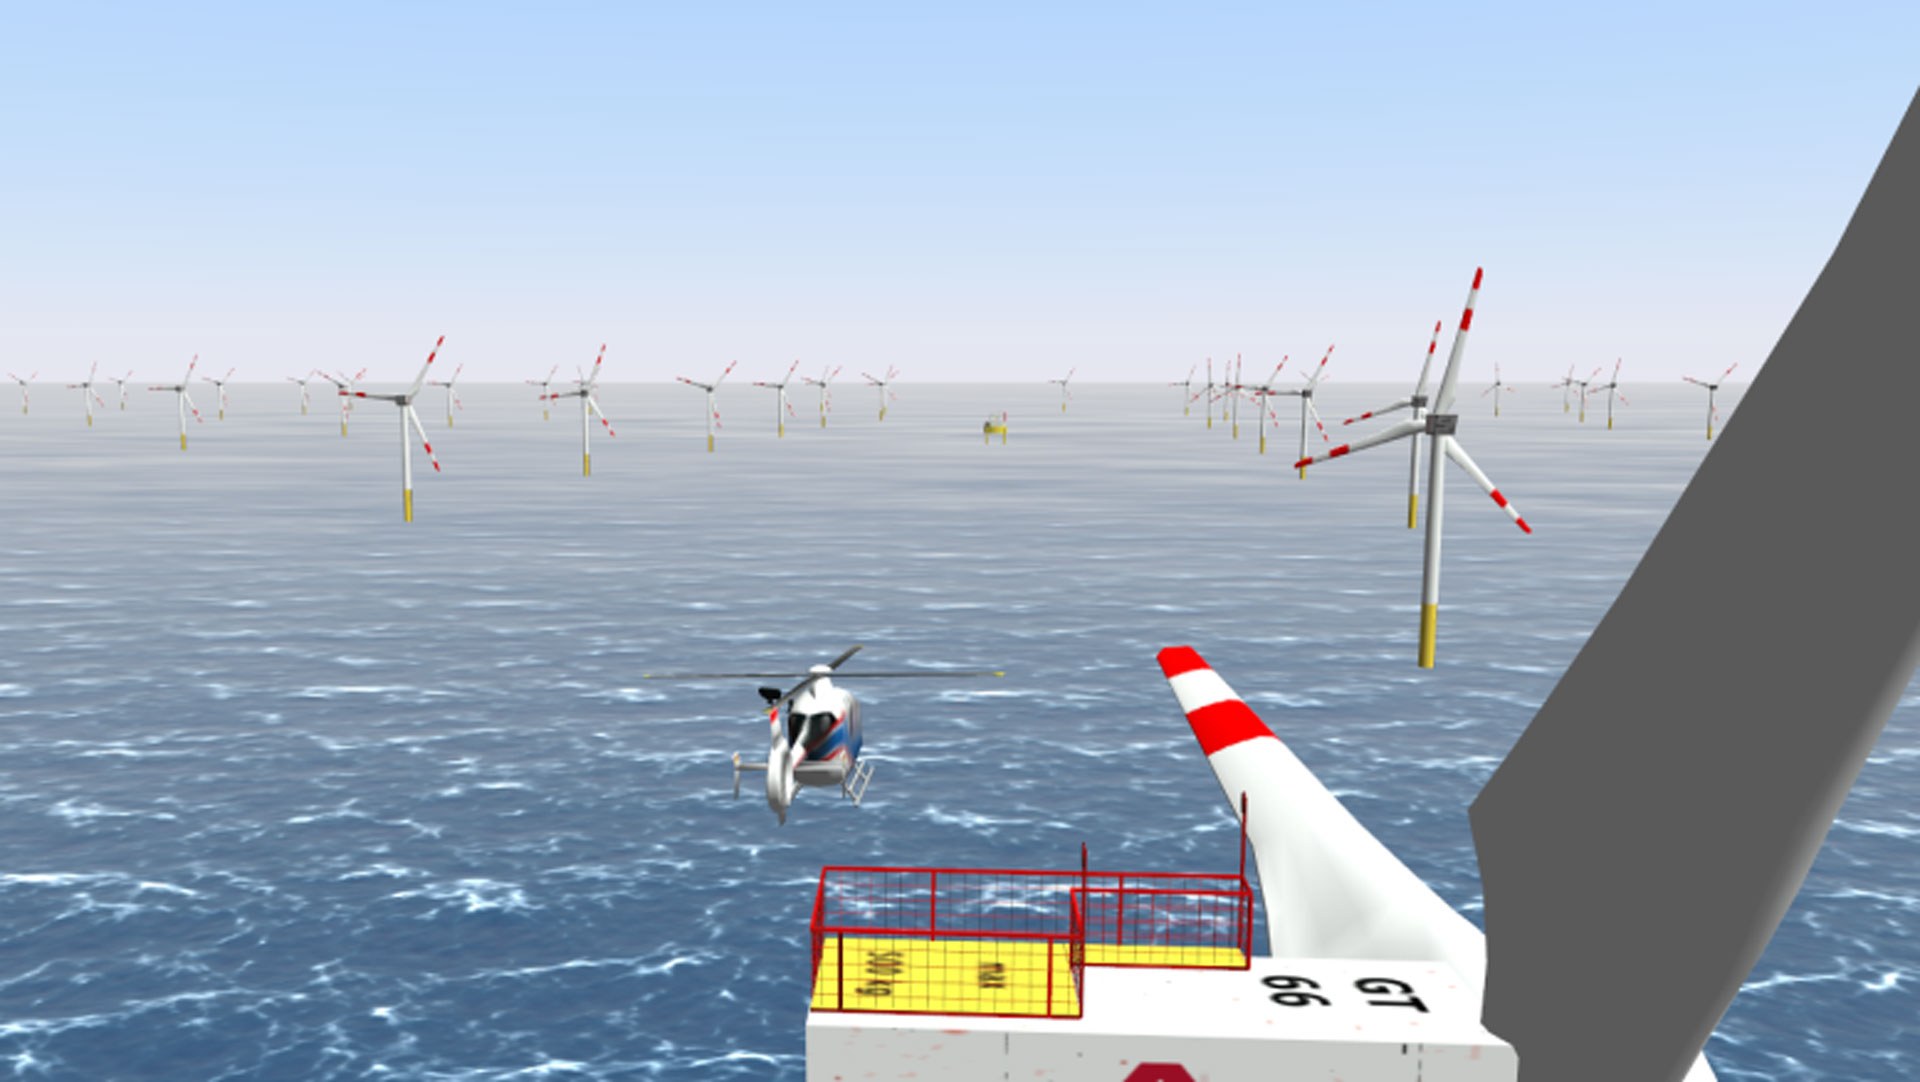 Preliminary study on the use of helicopters in offshore wind farms (simulation)